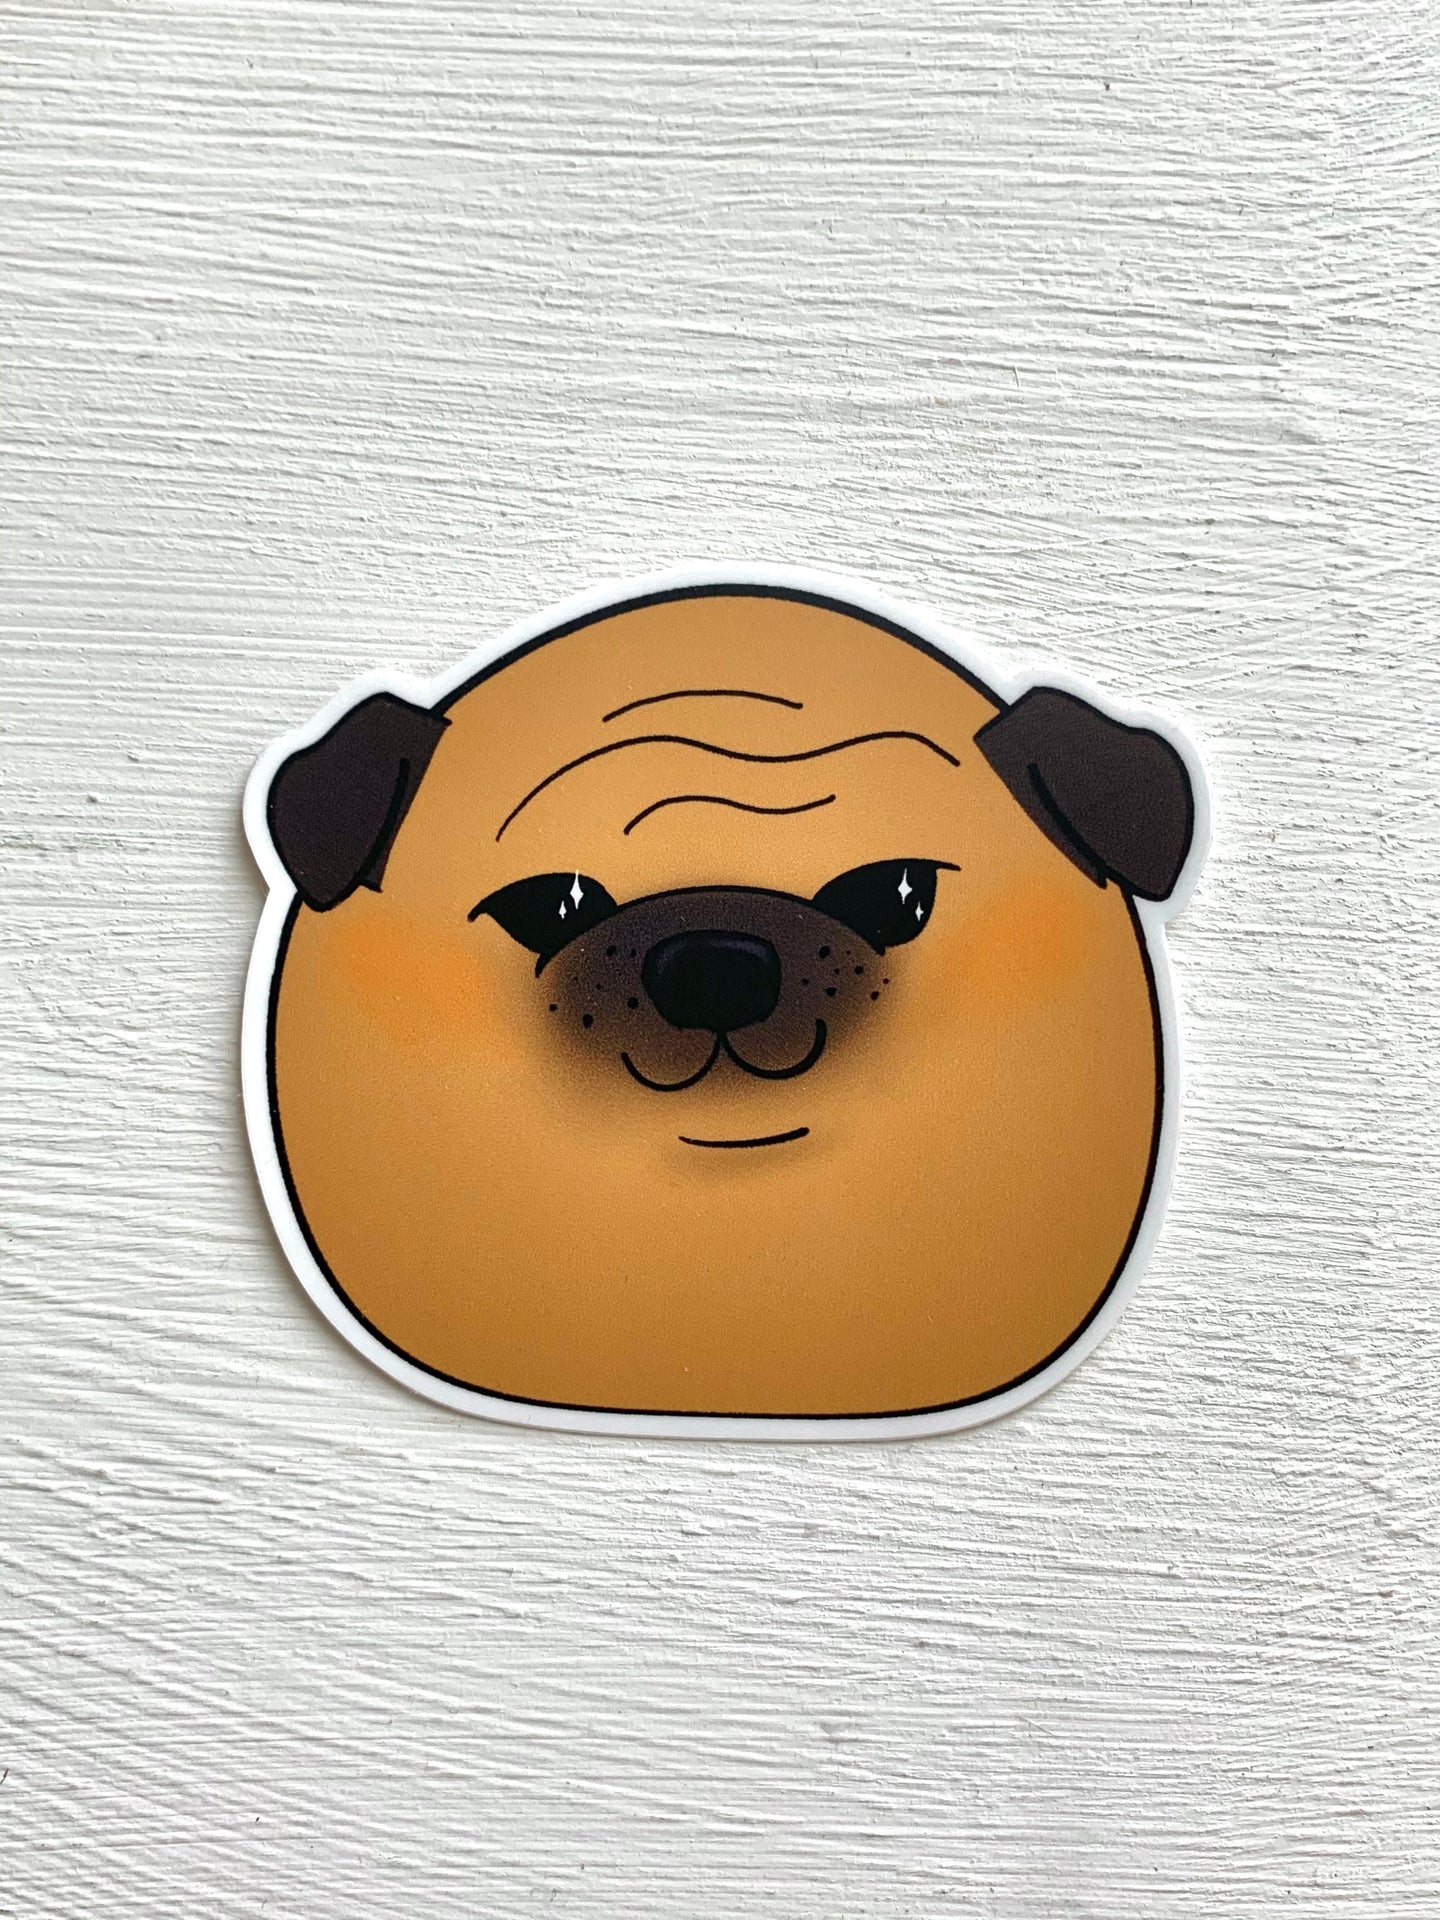 Doggy stickers